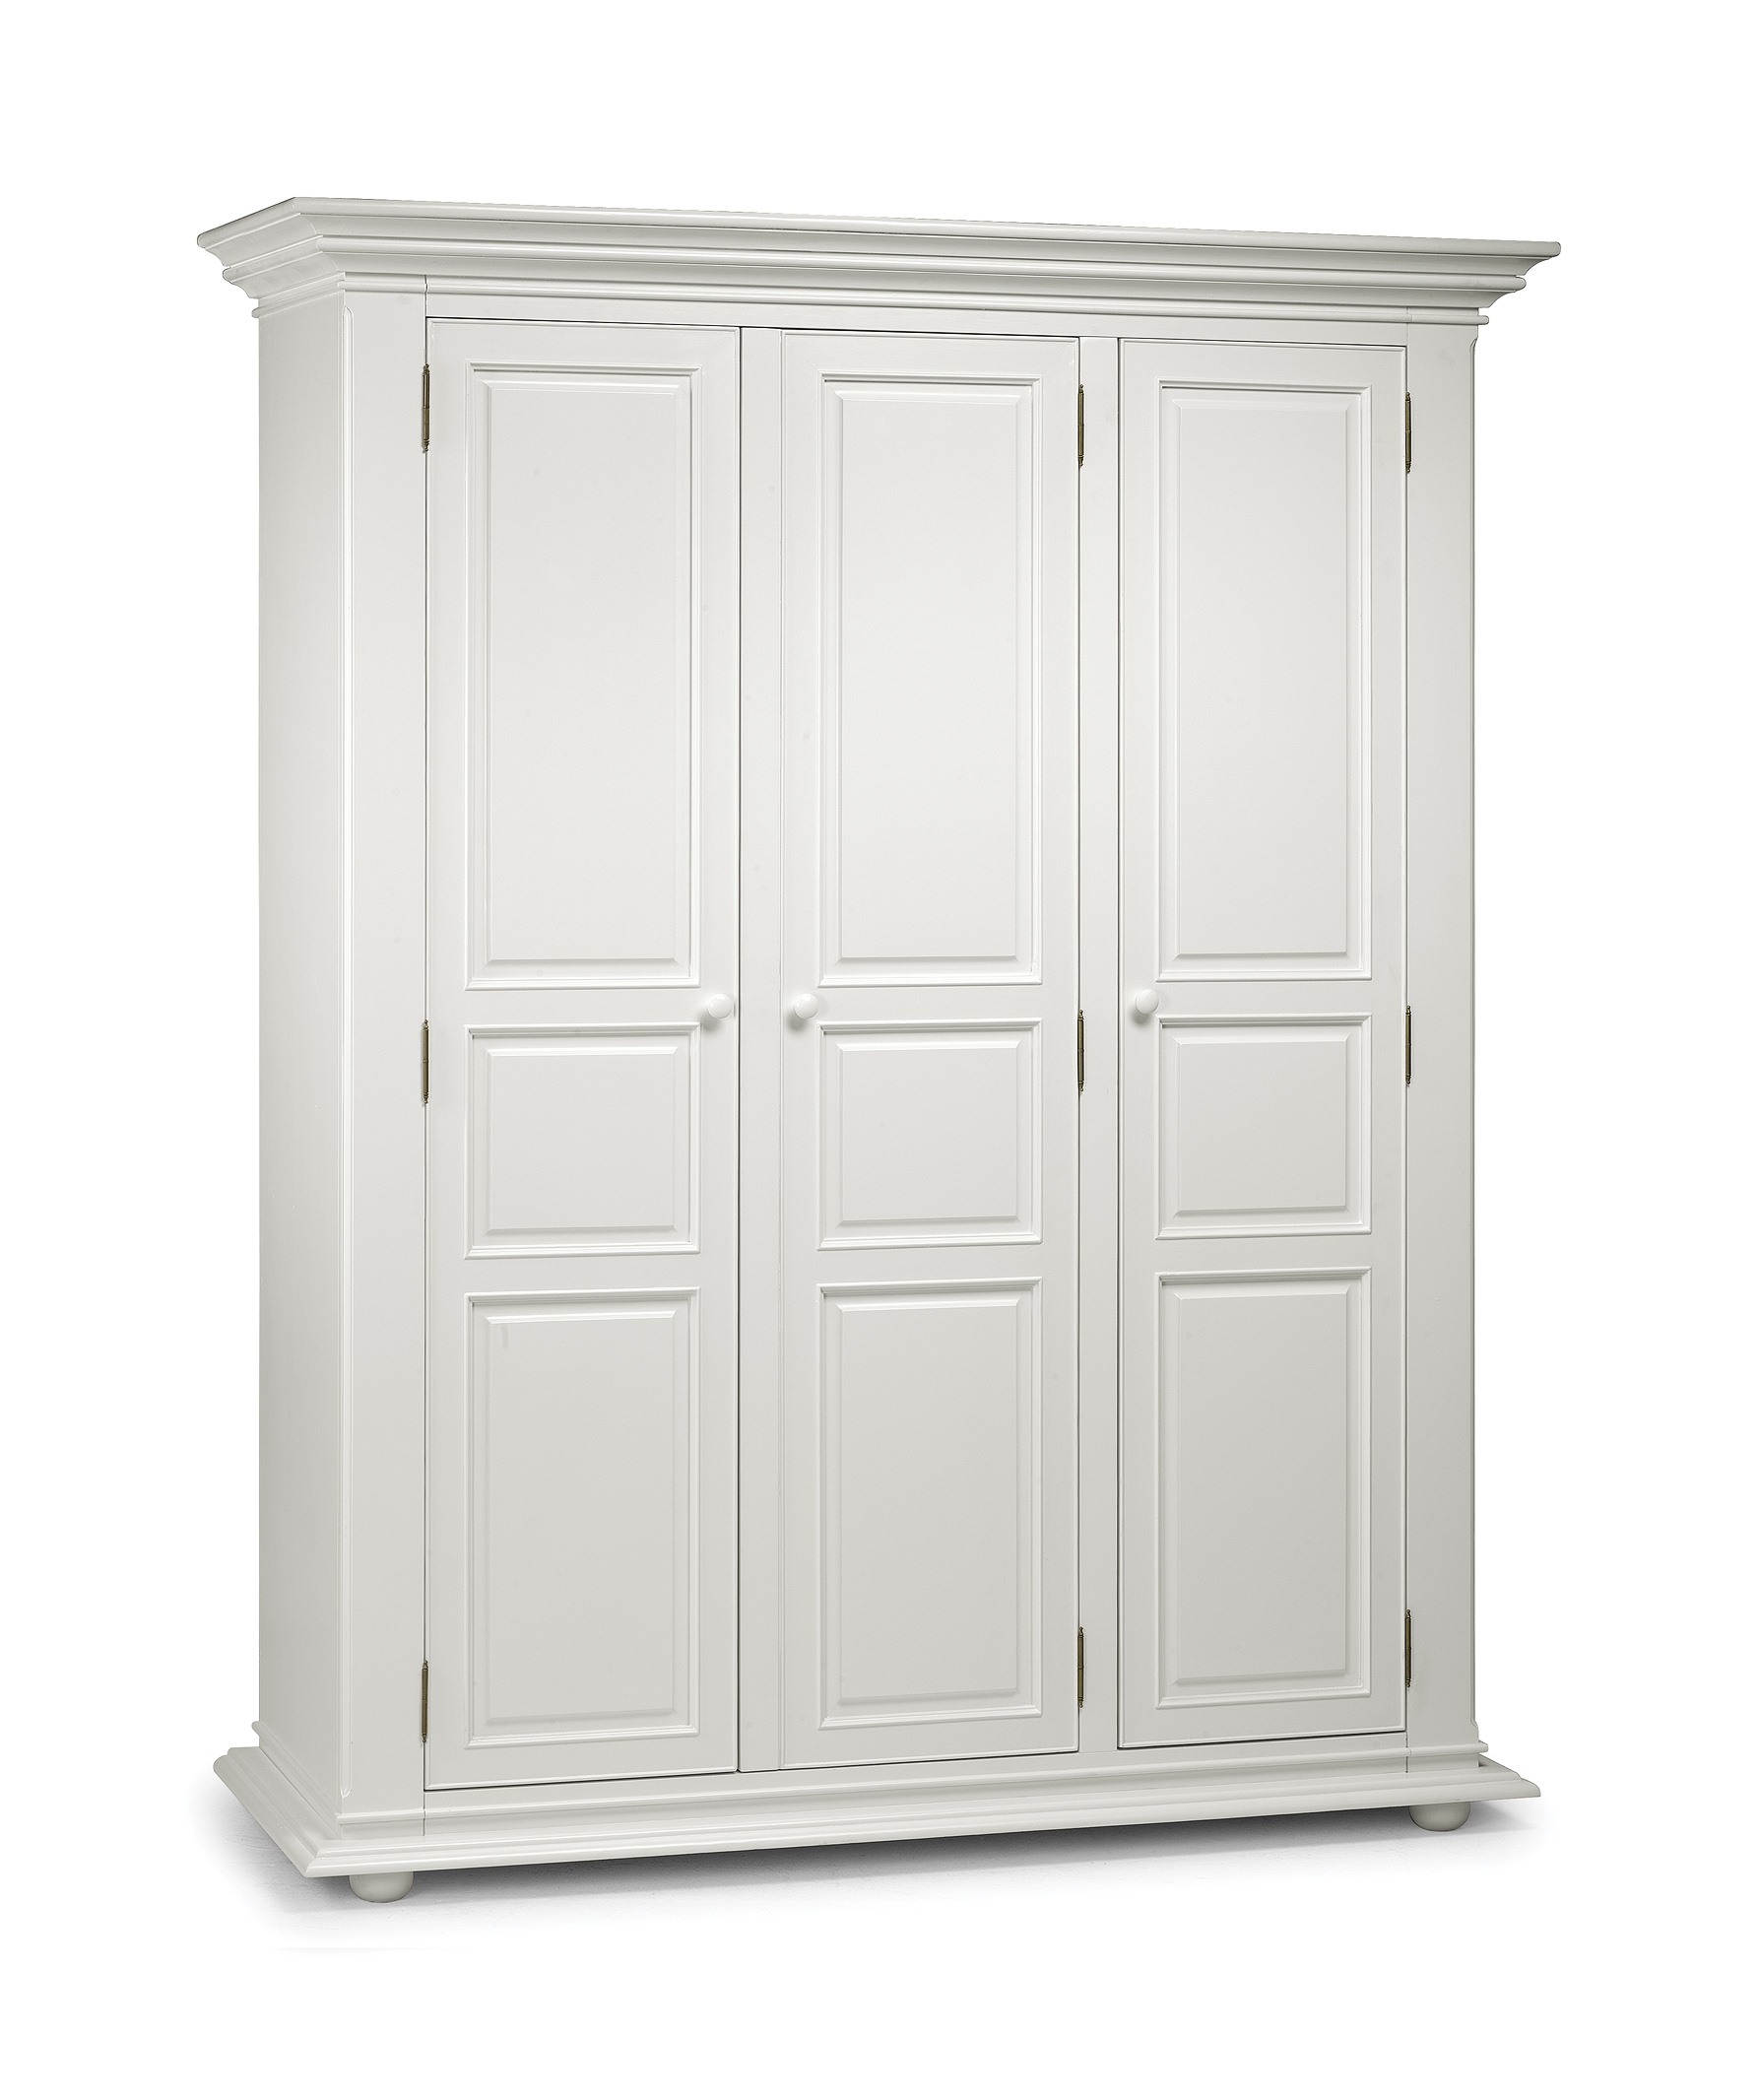 The Josephine 3 drawer wardrobe is a beautifully designed piece of furniture which will bring a touc